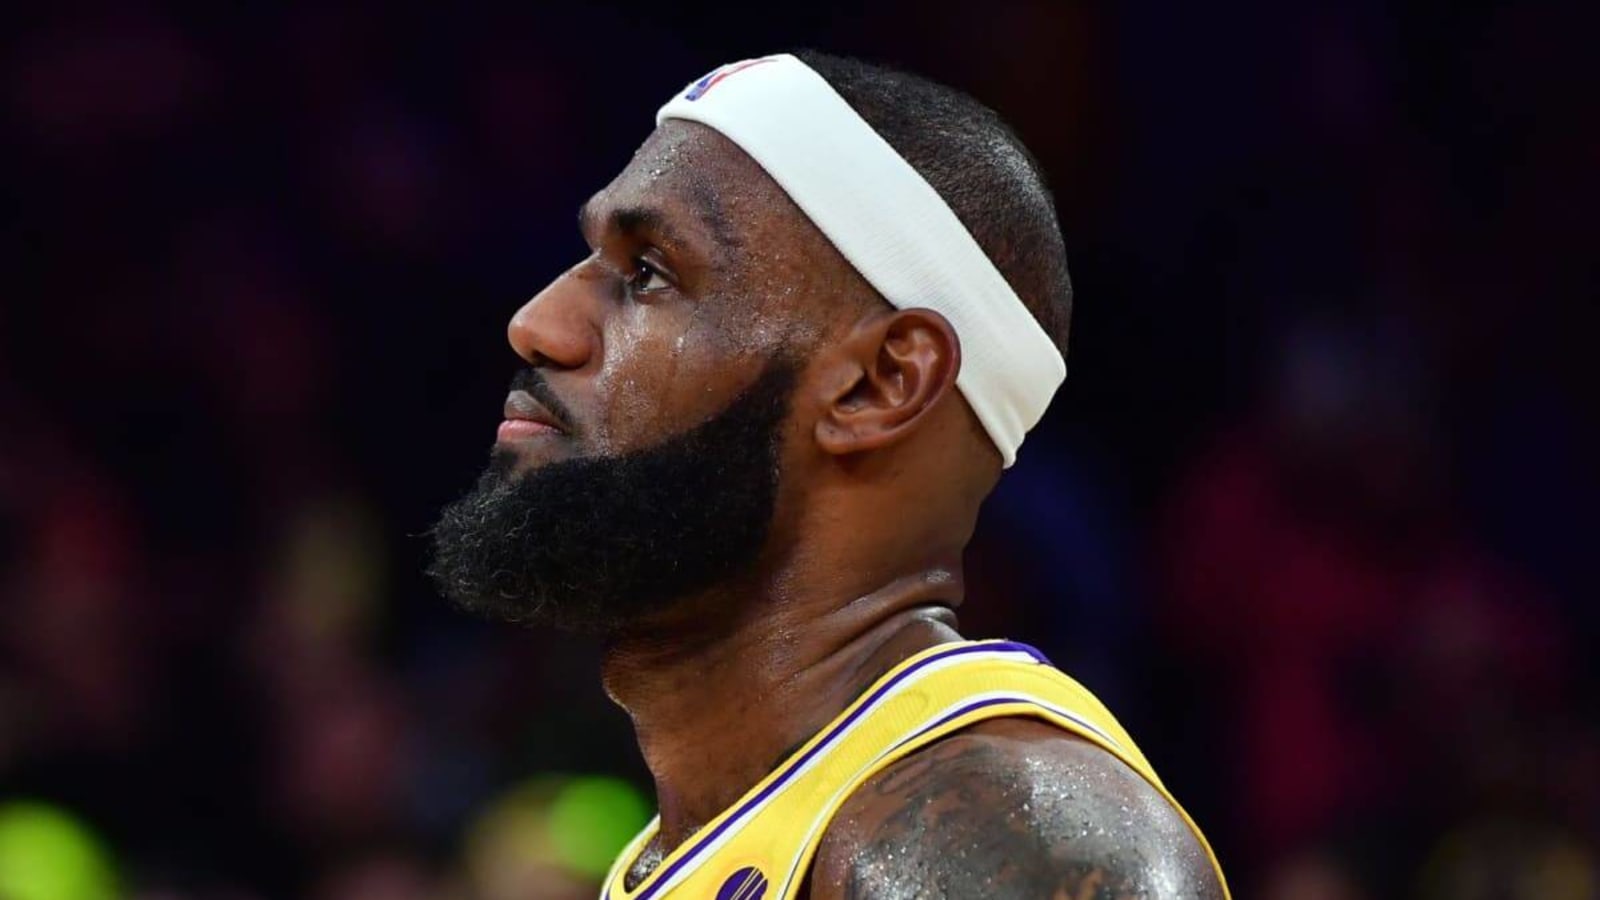  LeBron James Leaves Historic Night Early With Injury